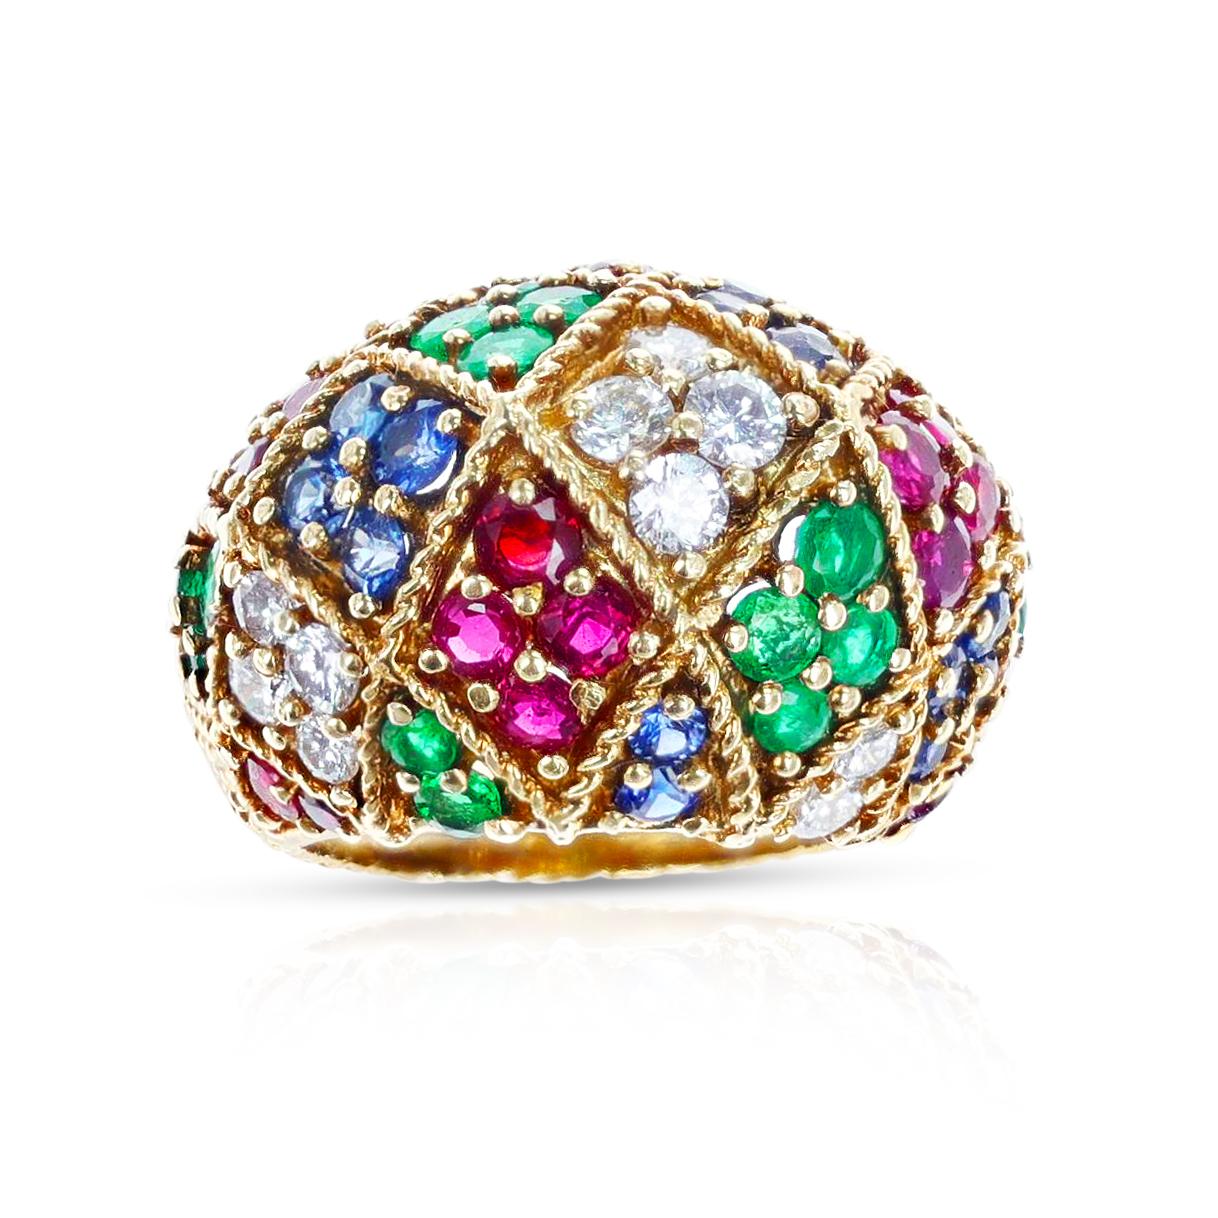 A Ruby, Emerald, Sapphire and Diamond Textured Gold Bombe Ring made in 18 Karat Yellow Gold. The total weight of the ring is 15.45 grams. The ring size is US 5. 

 